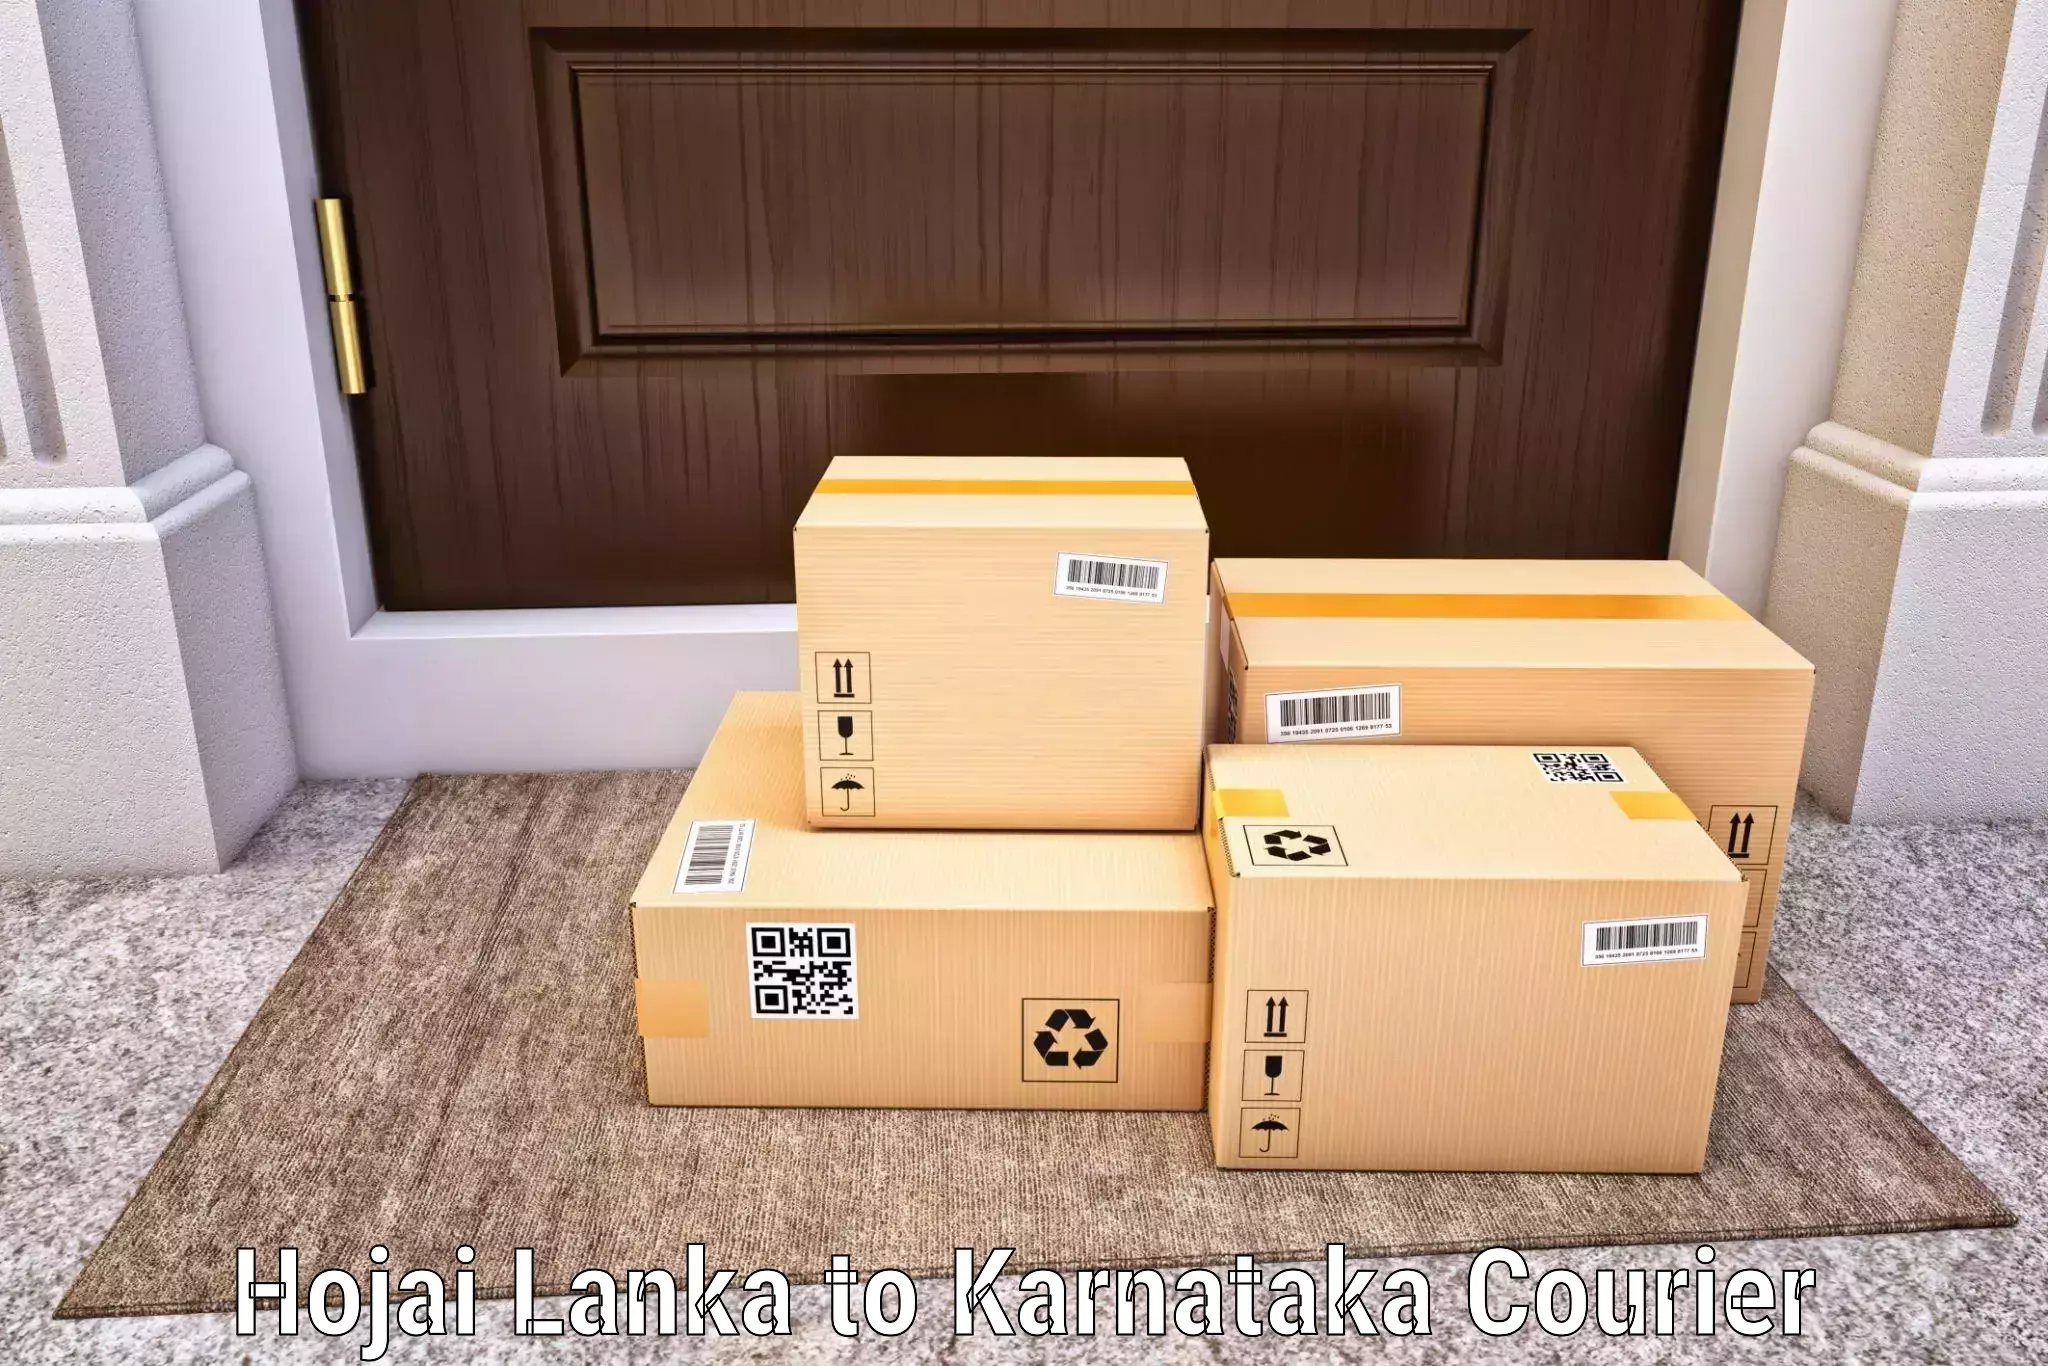 Large package courier Hojai Lanka to Anavatti